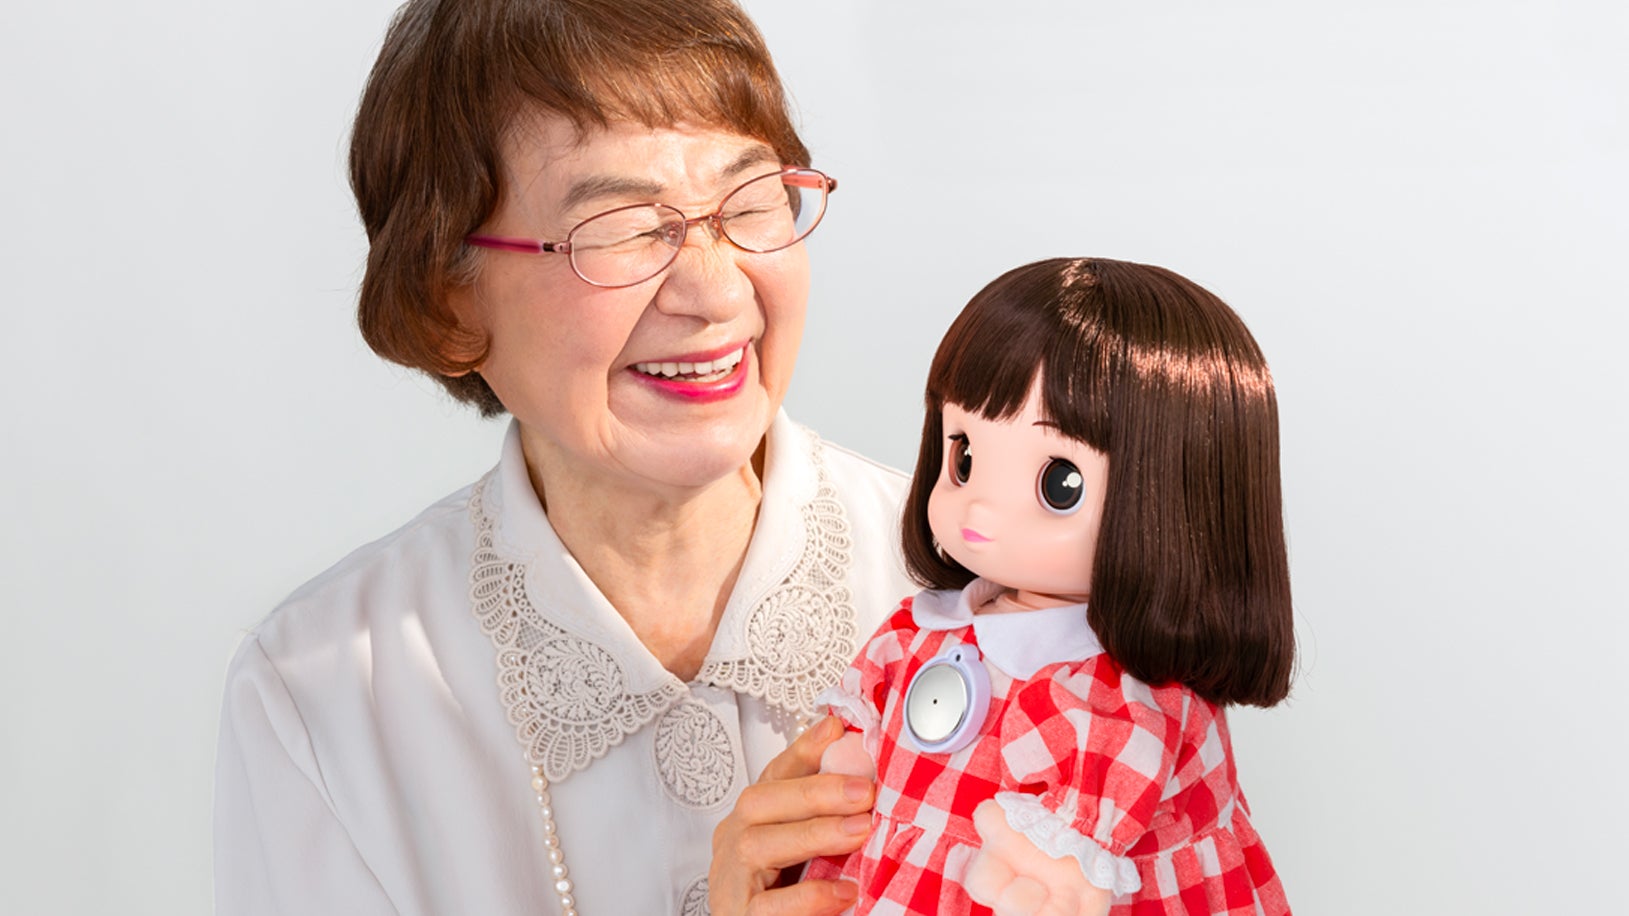 Like a real grandchild, Ami-chan will seem completely disinterested in your stories and will avoid making eye contact. (Image: Takara Tomy)